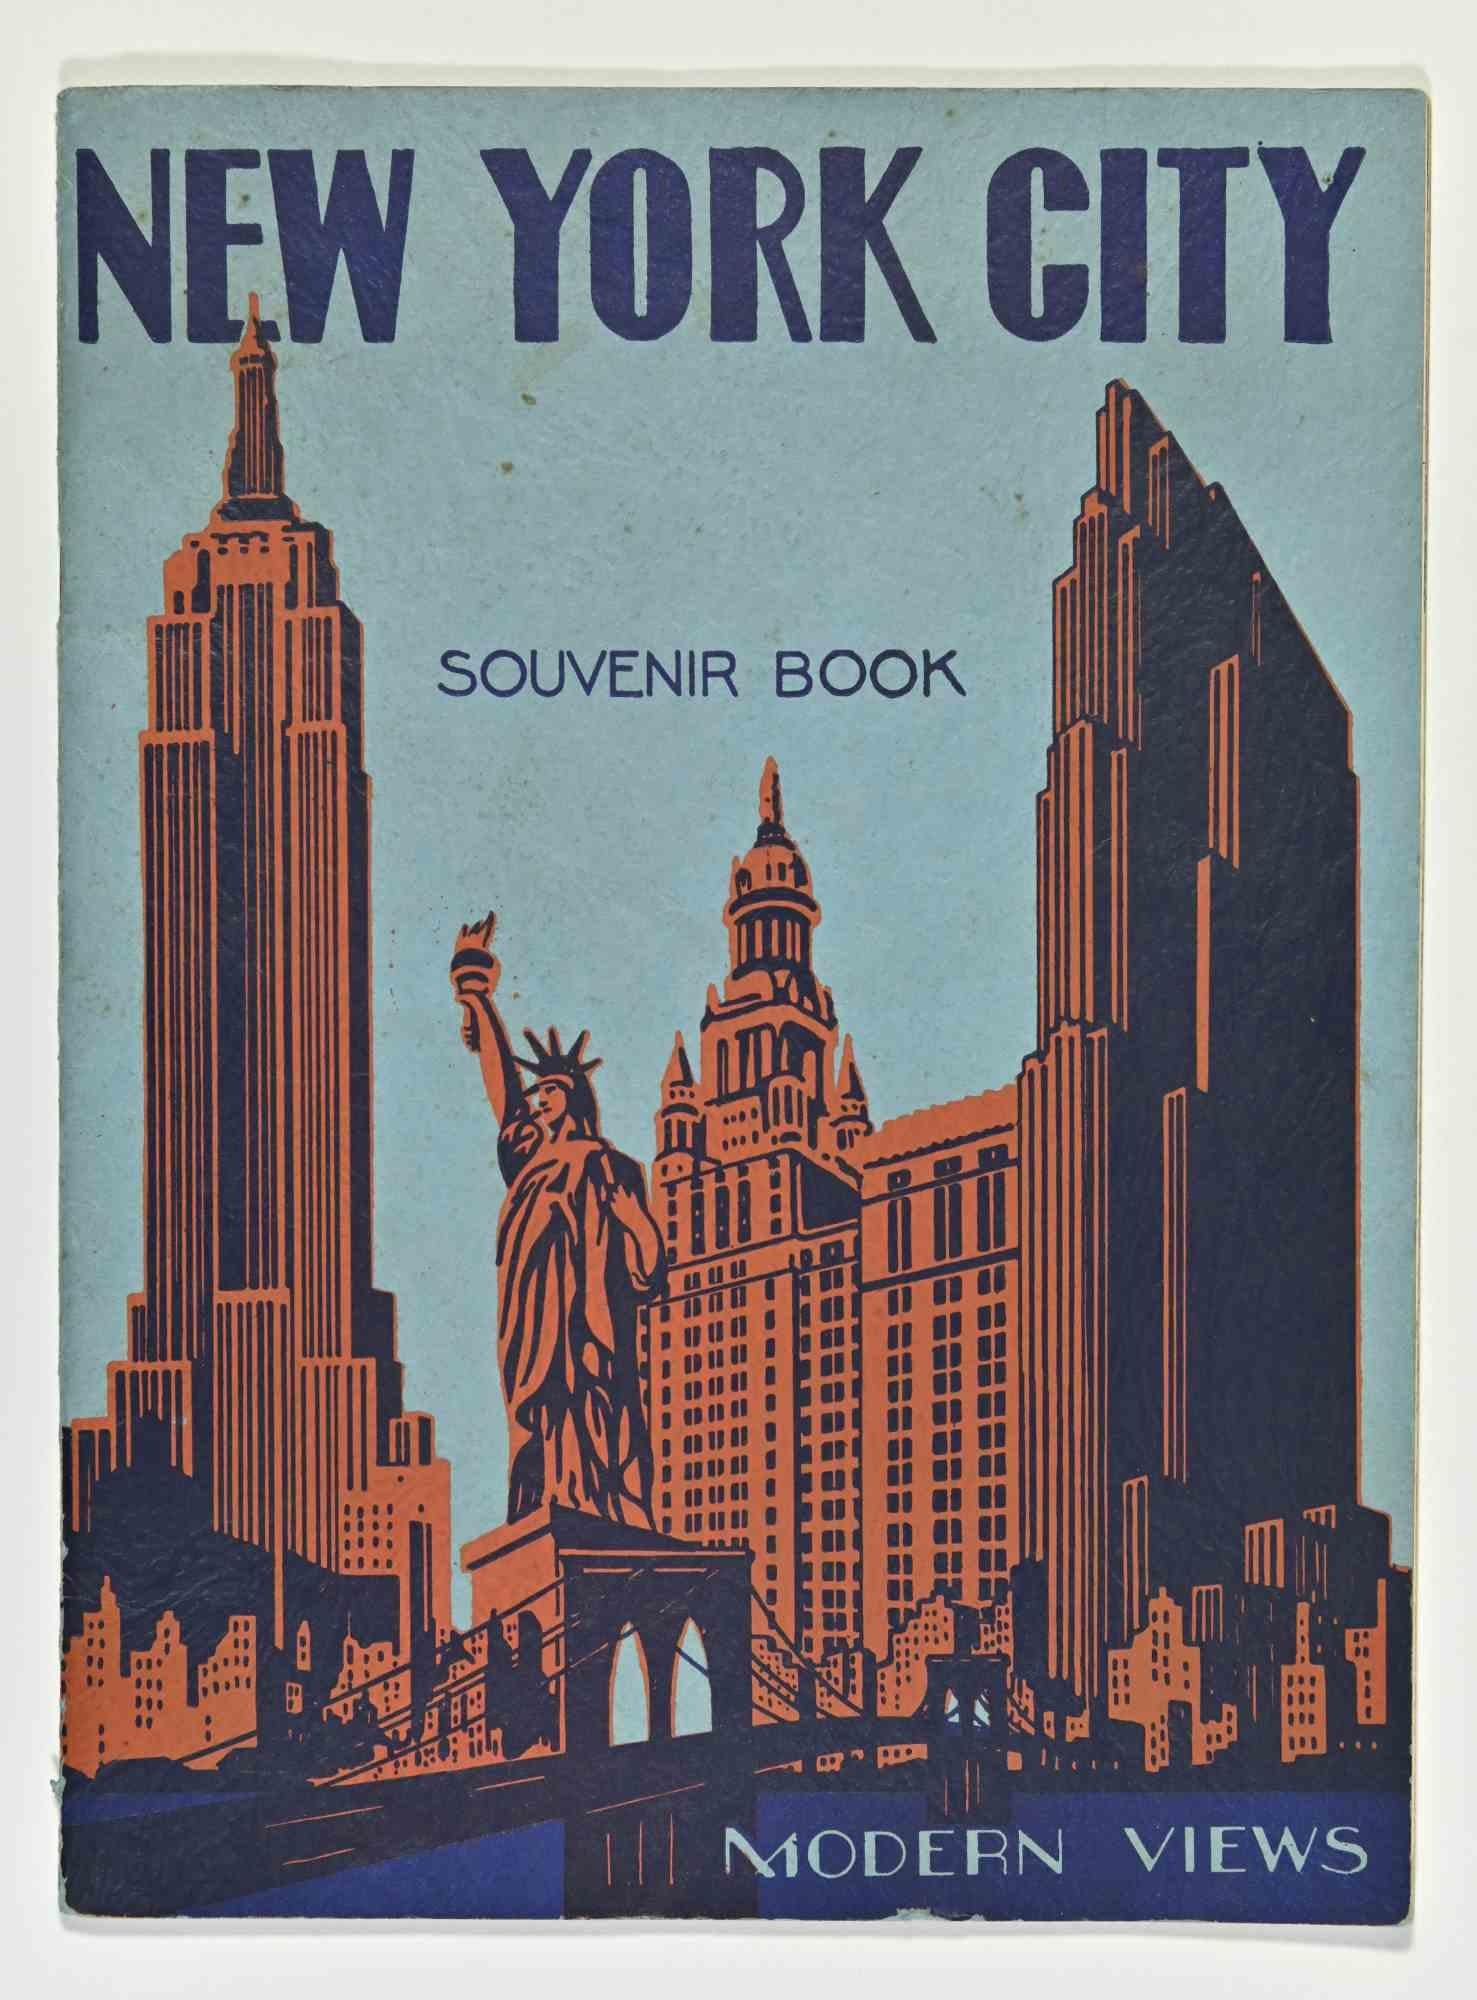 A Book of Modern Views of New York City  - 1937